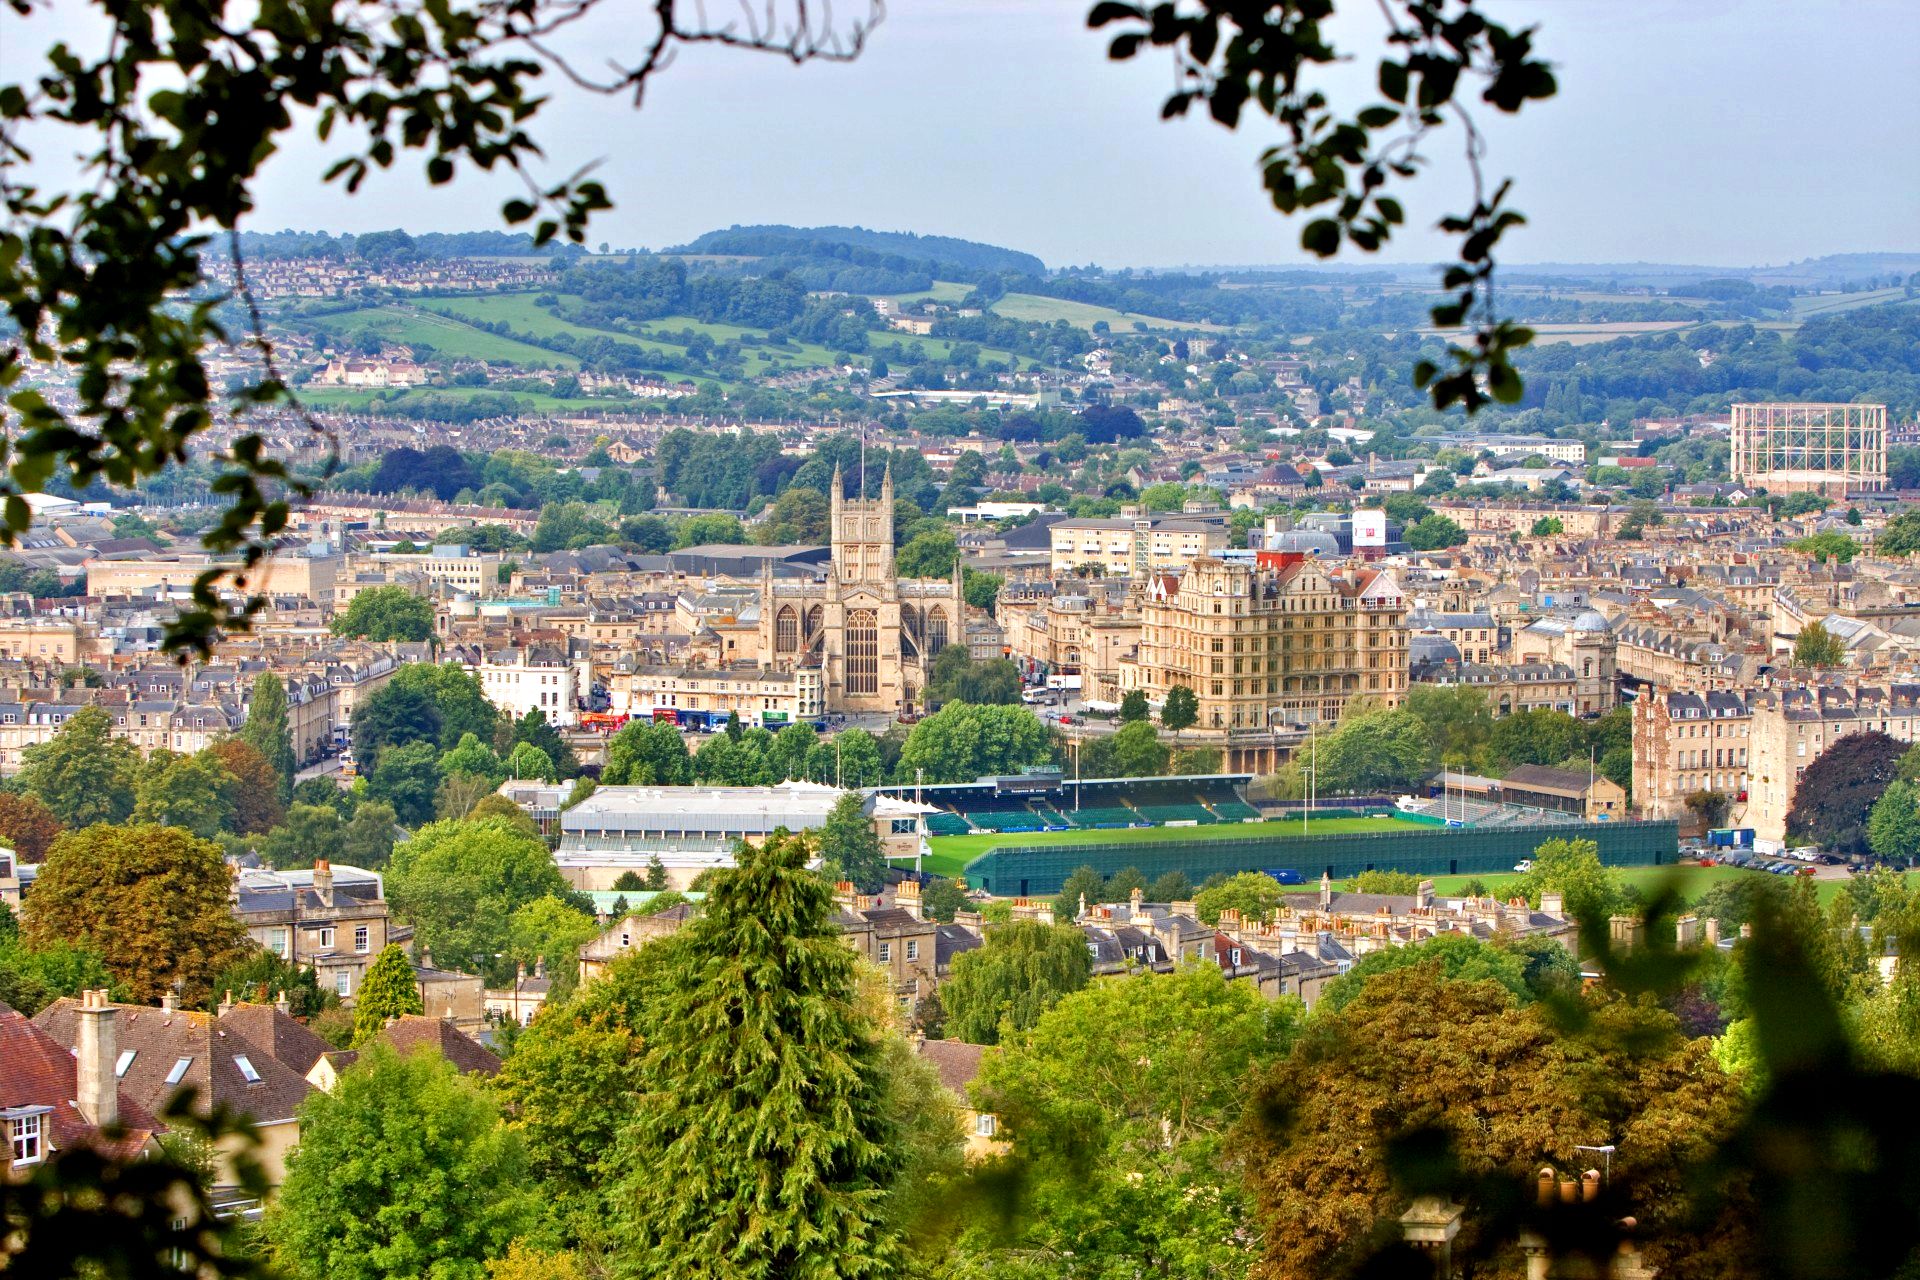 Aerial view of the City of Bath in England, UK